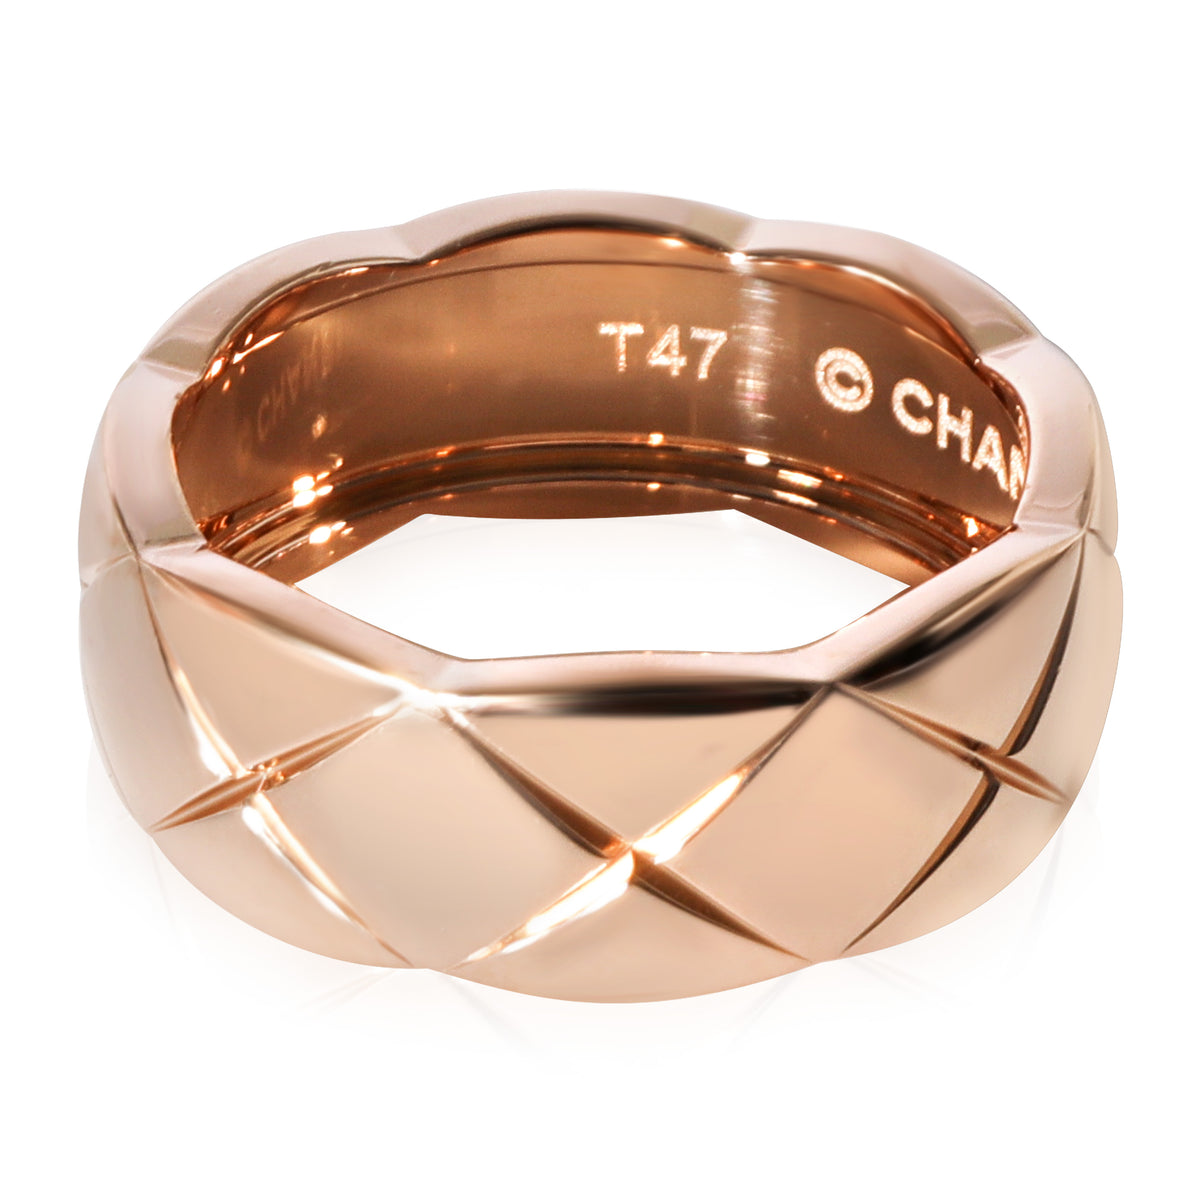 Chanel Coco Crush Ring in 18k Rose Gold, Small Version, myGemma